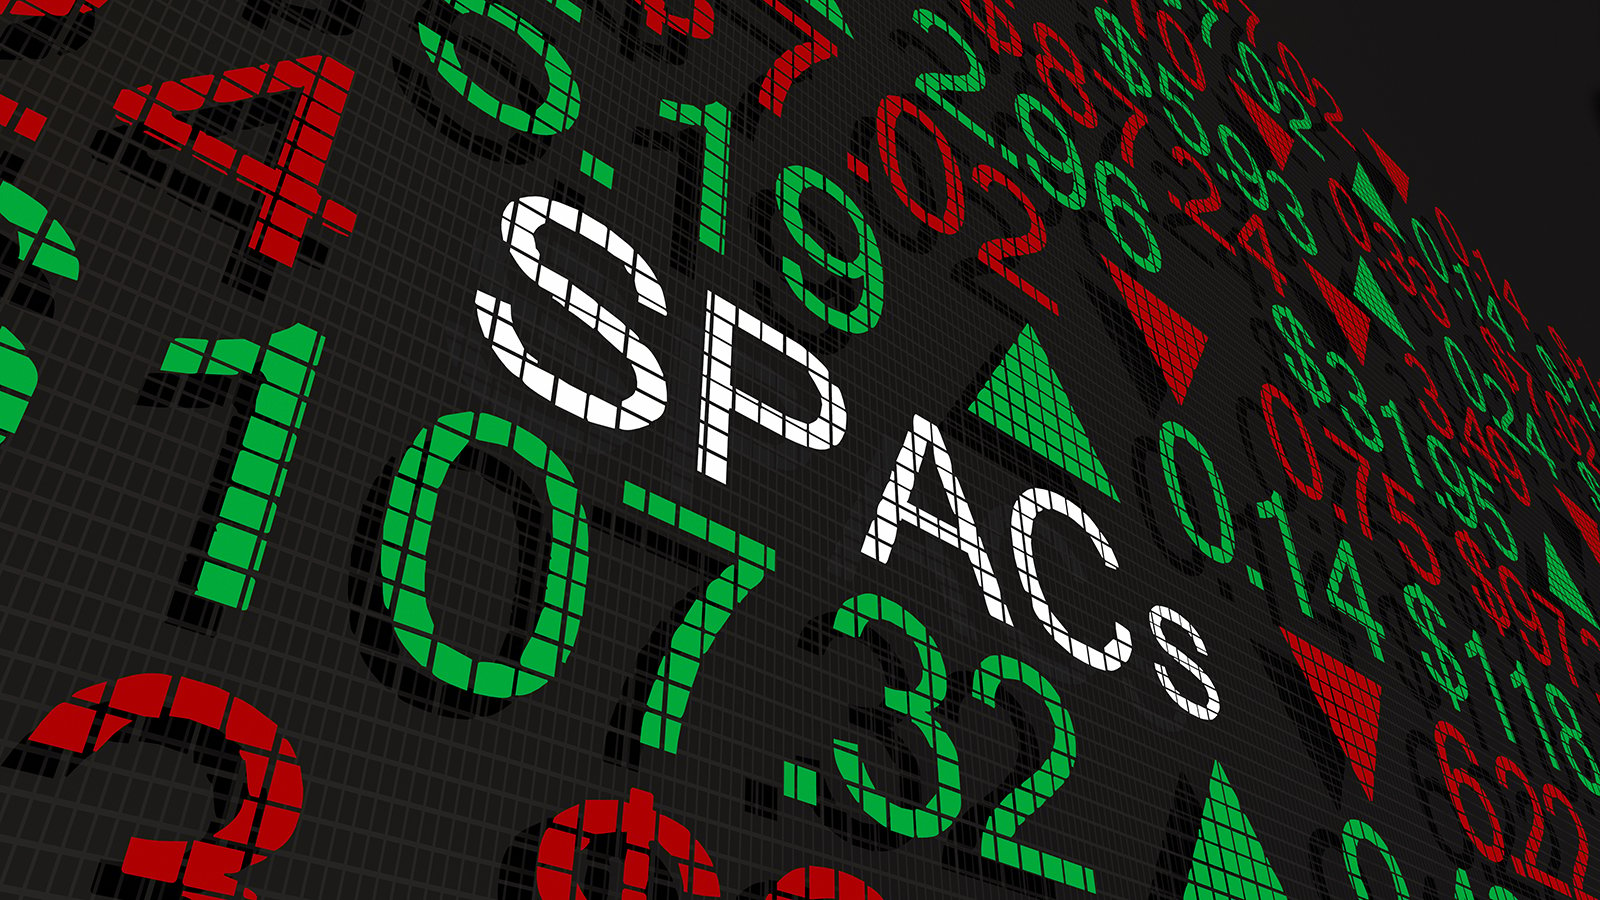 CACO Stock. A 3D illustration of the word SPACs on a stock board full of numbers and up and down arrows.